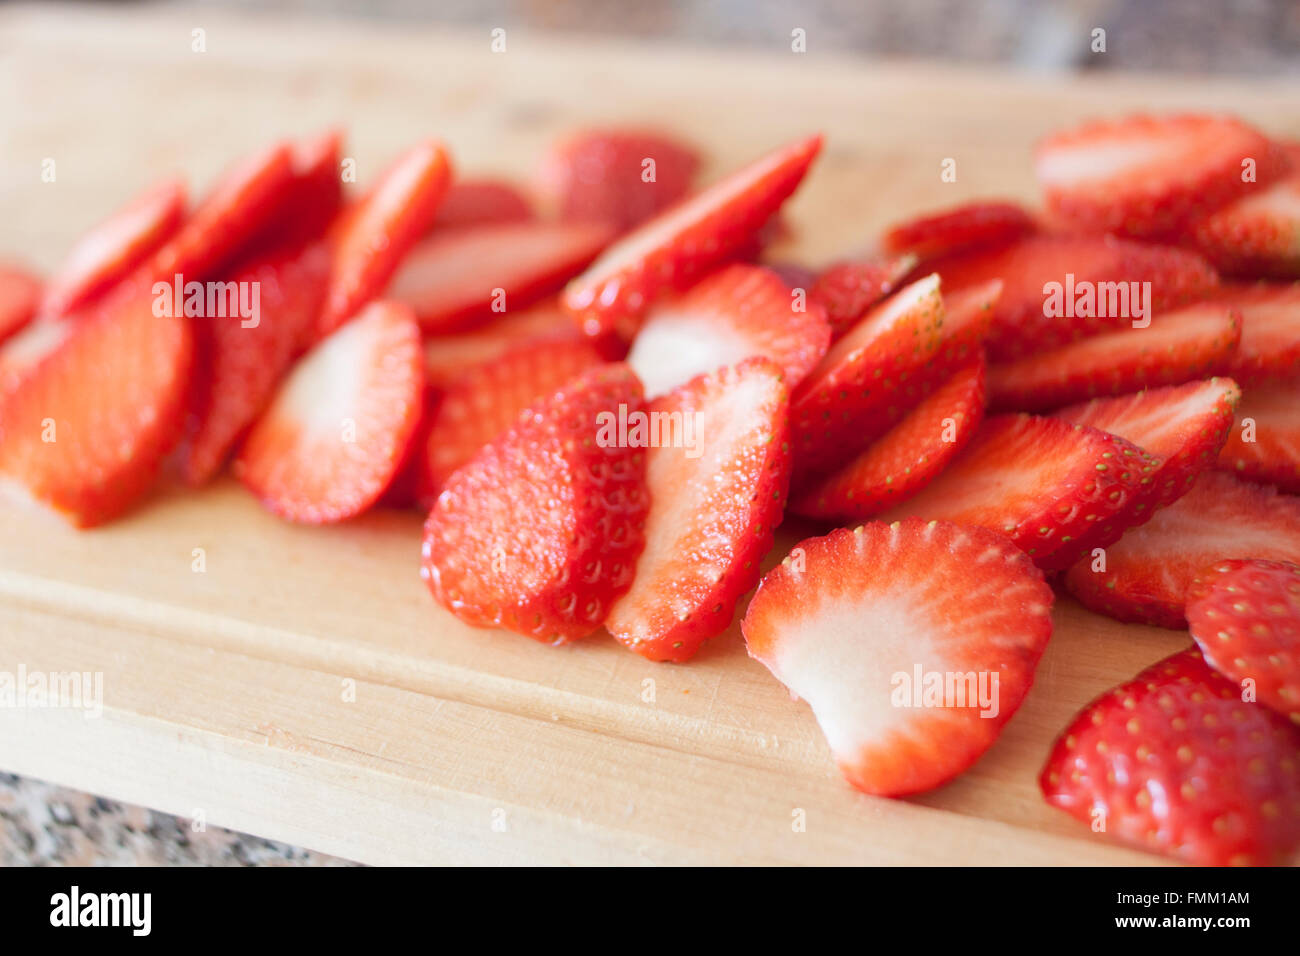 Strawberry slices on a wooden cutting board Stock Photo